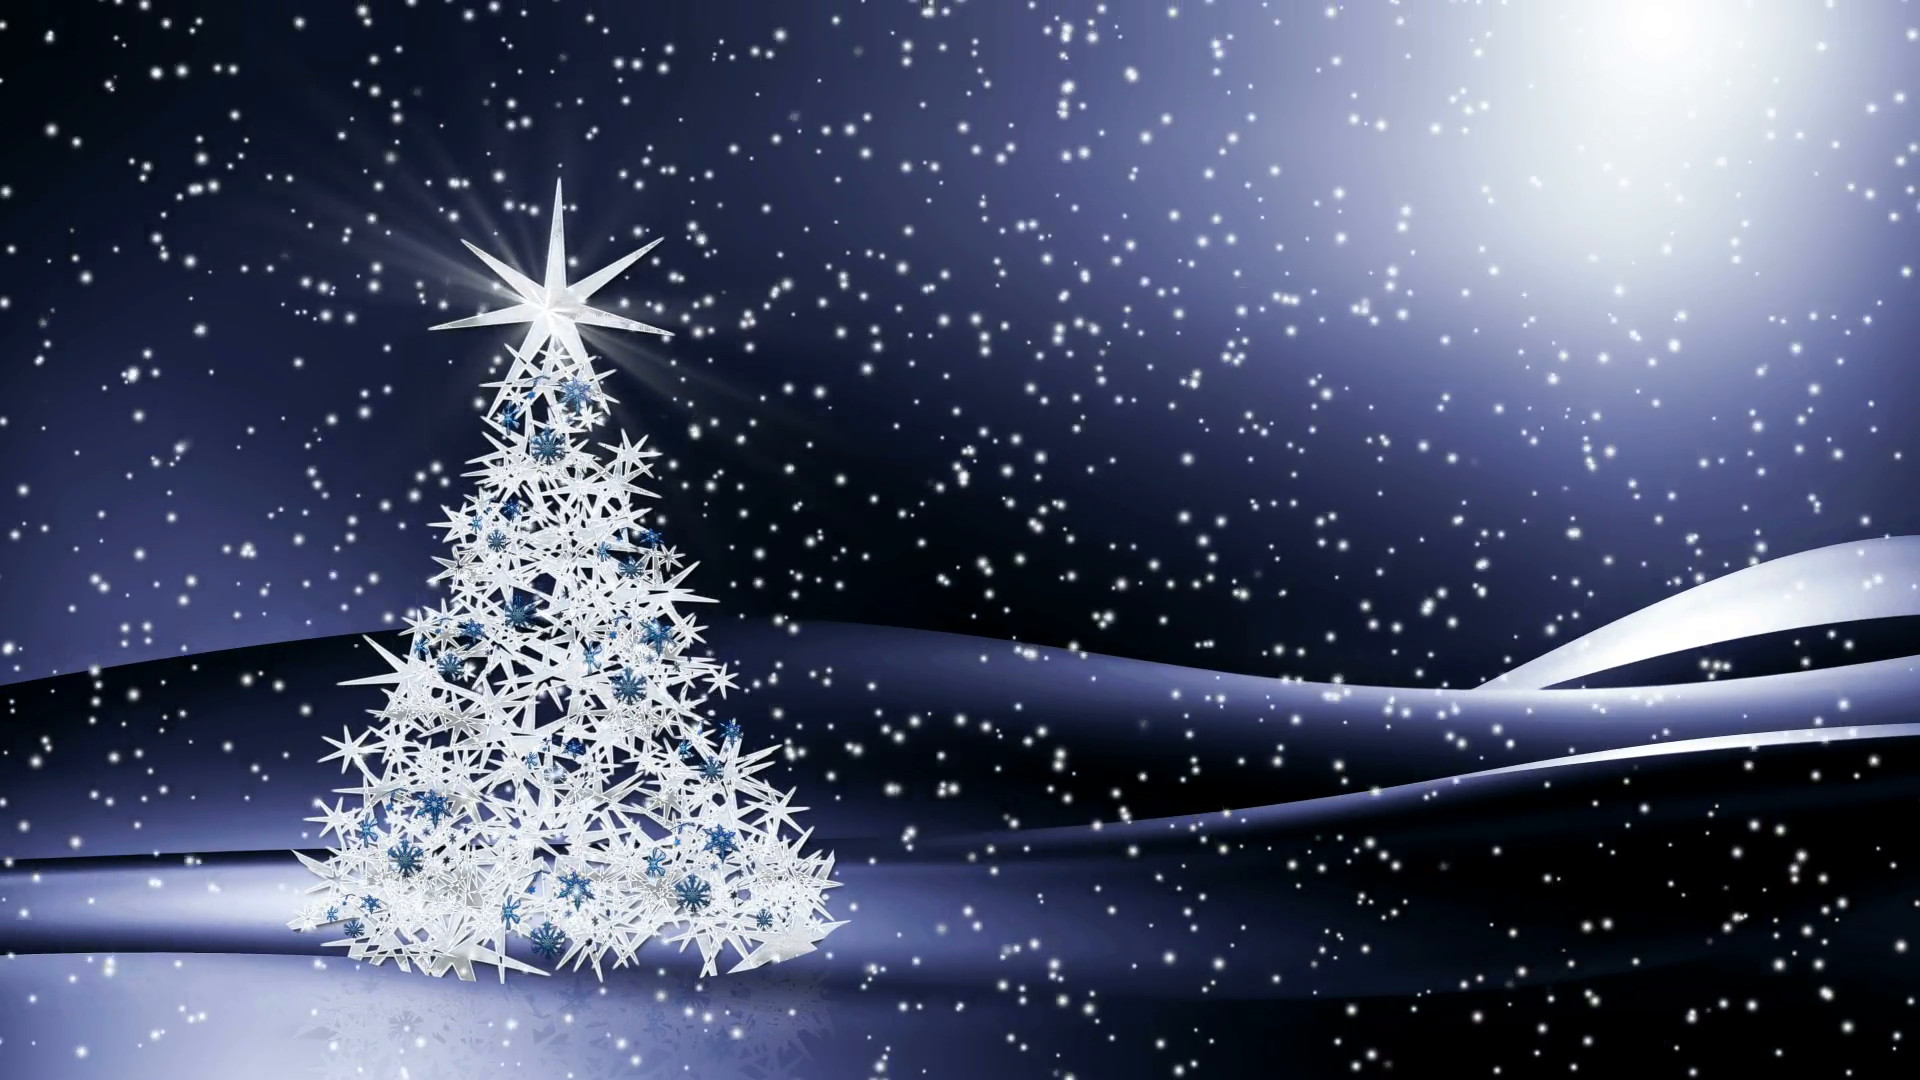 1920x1080 Sparkling decorated Christmas tree shining in the snowy night, Christmas  tree with snowflakes on blue